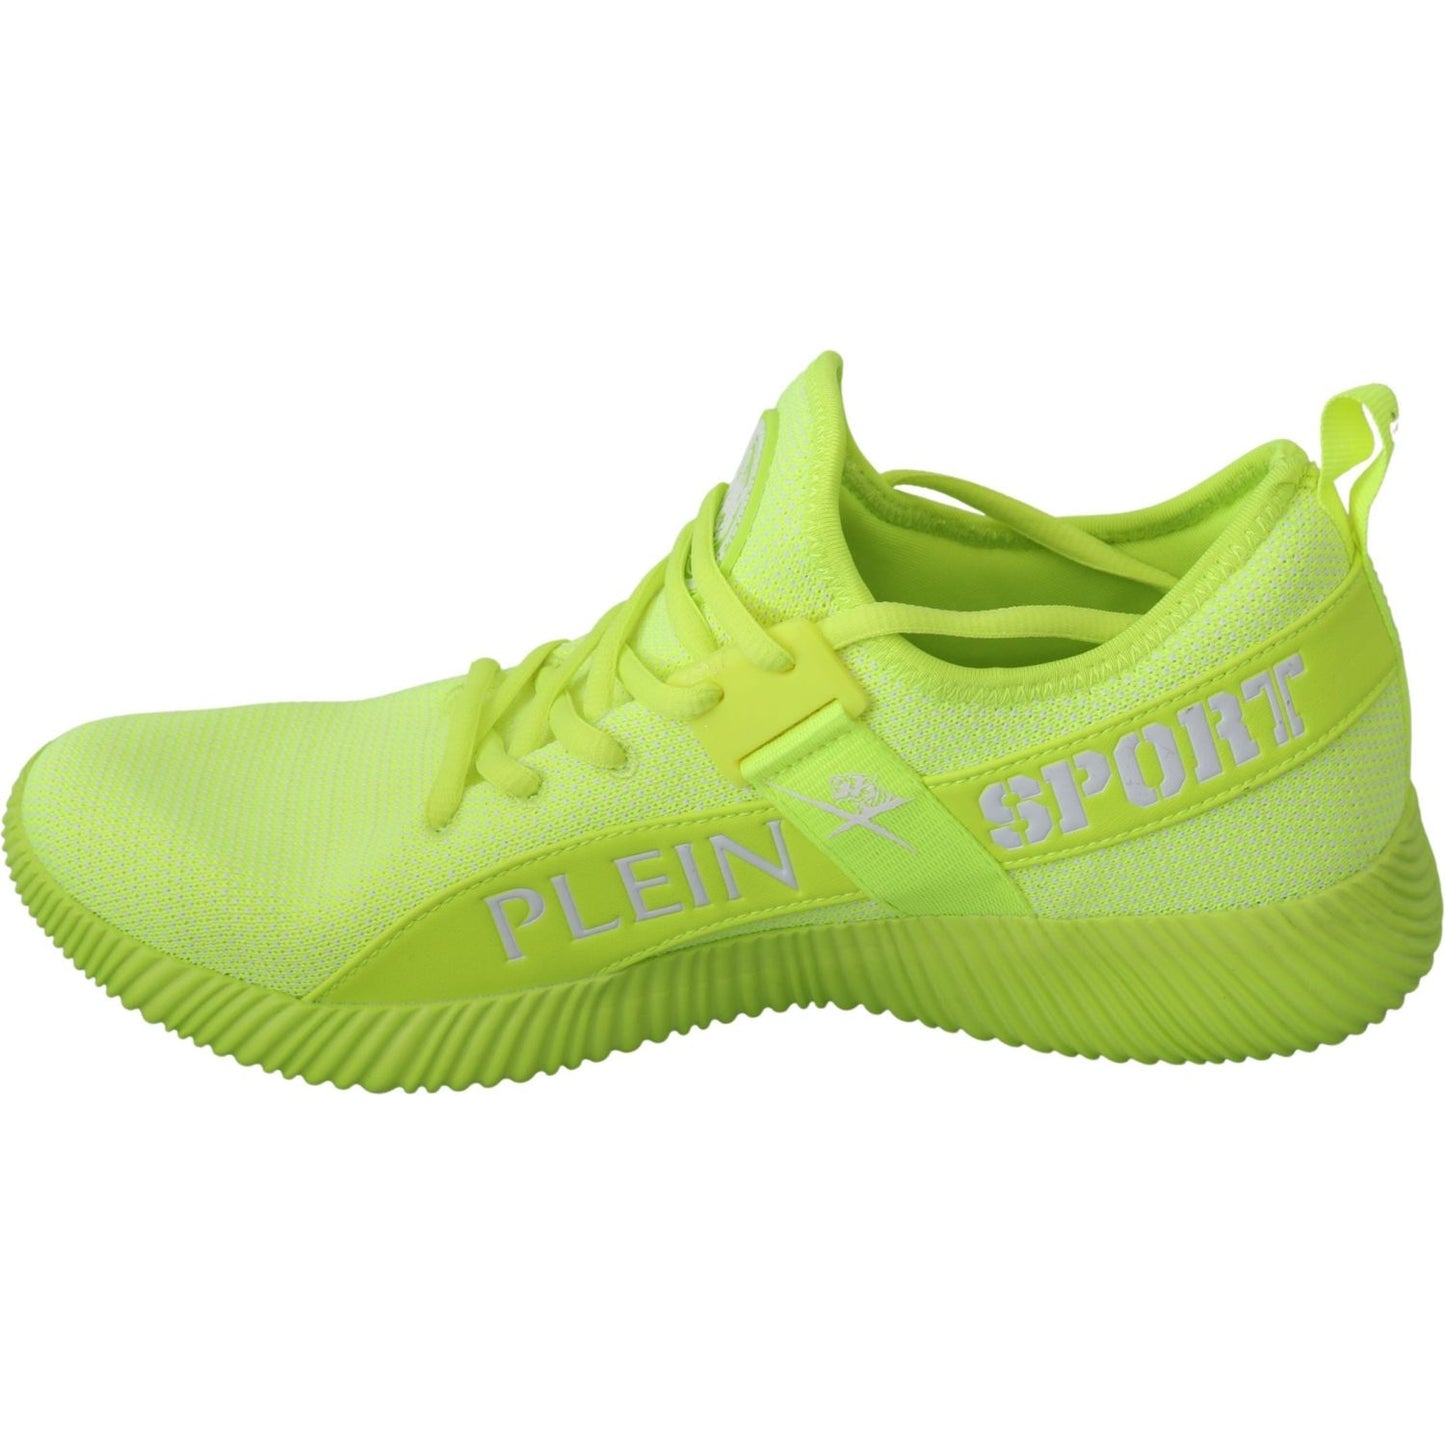 Philipp Plein Stylish Light Green Casual Sneakers green-carter-logo-hi-top-sneakers-shoes MAN SNEAKERS IMG_7547-scaled-d1fe7d7c-d2f.jpg